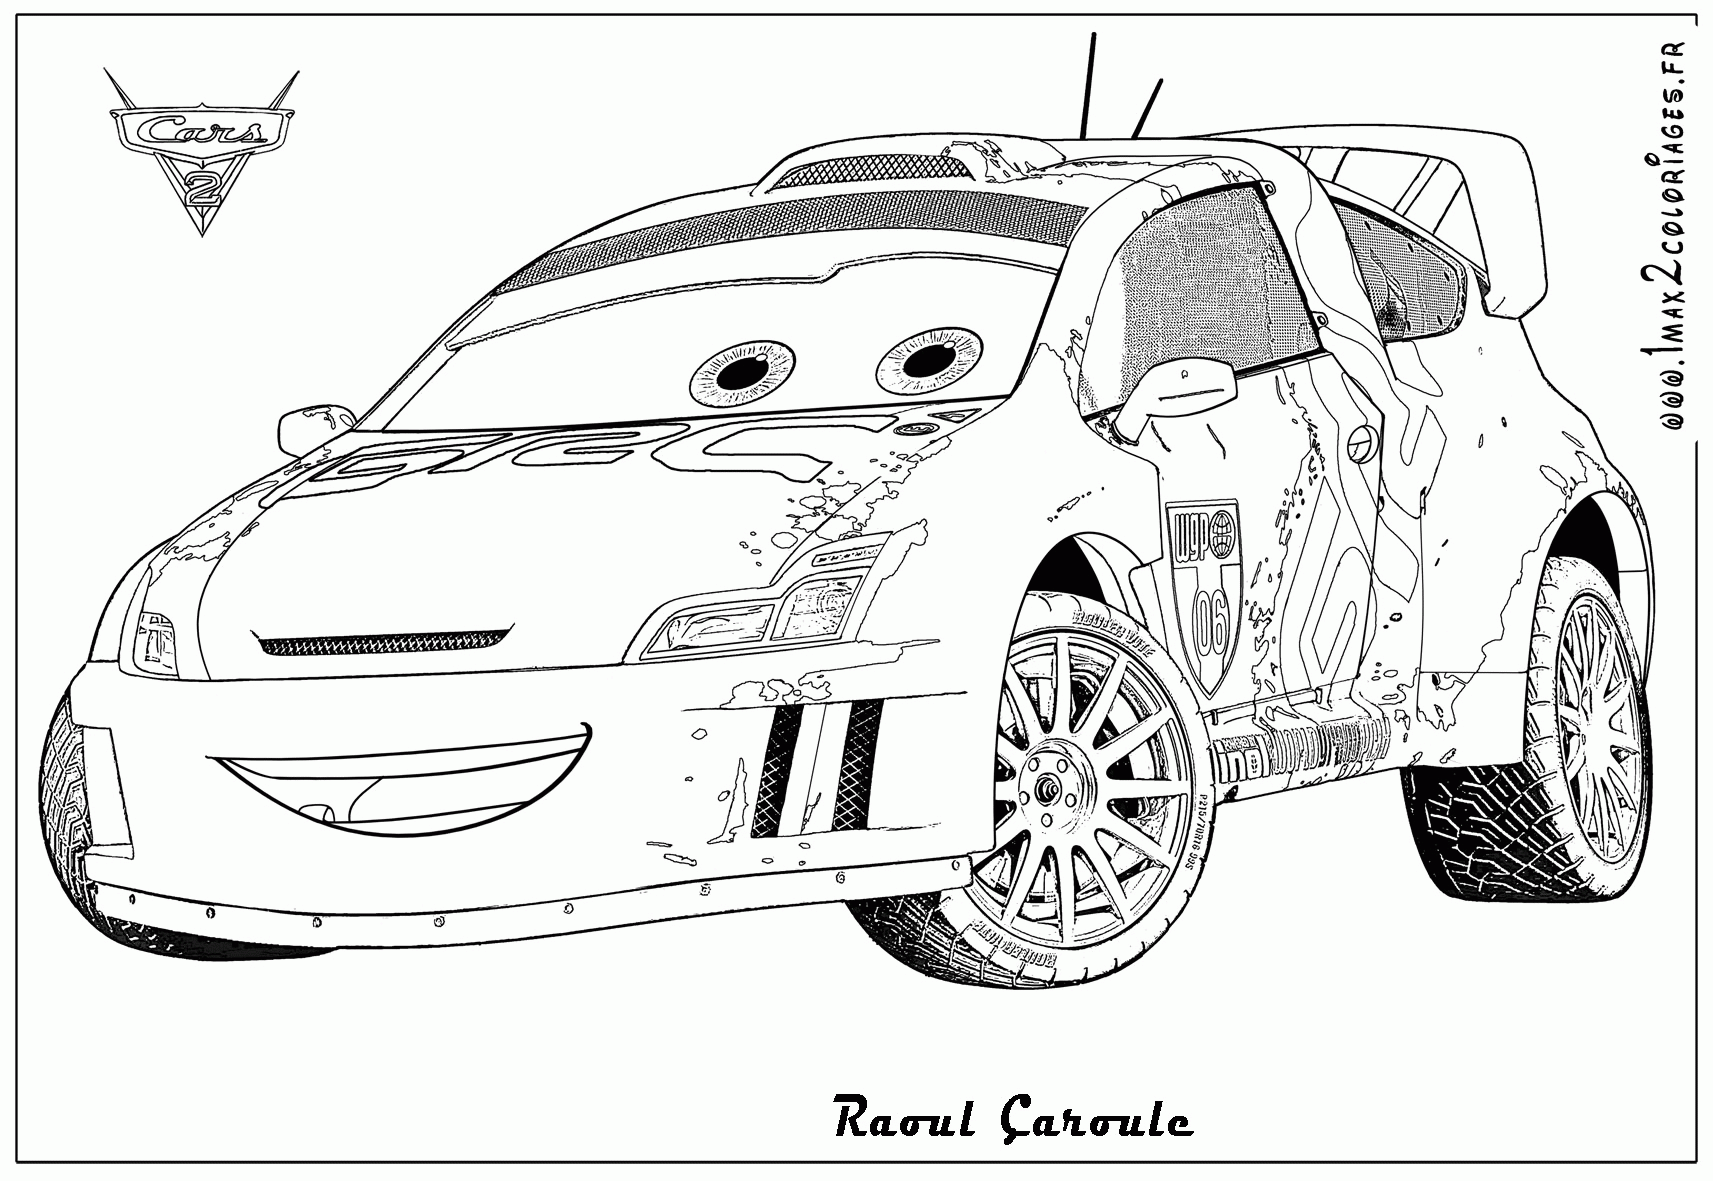 Disney Cars 2 - Coloring Pages for Kids and for Adults